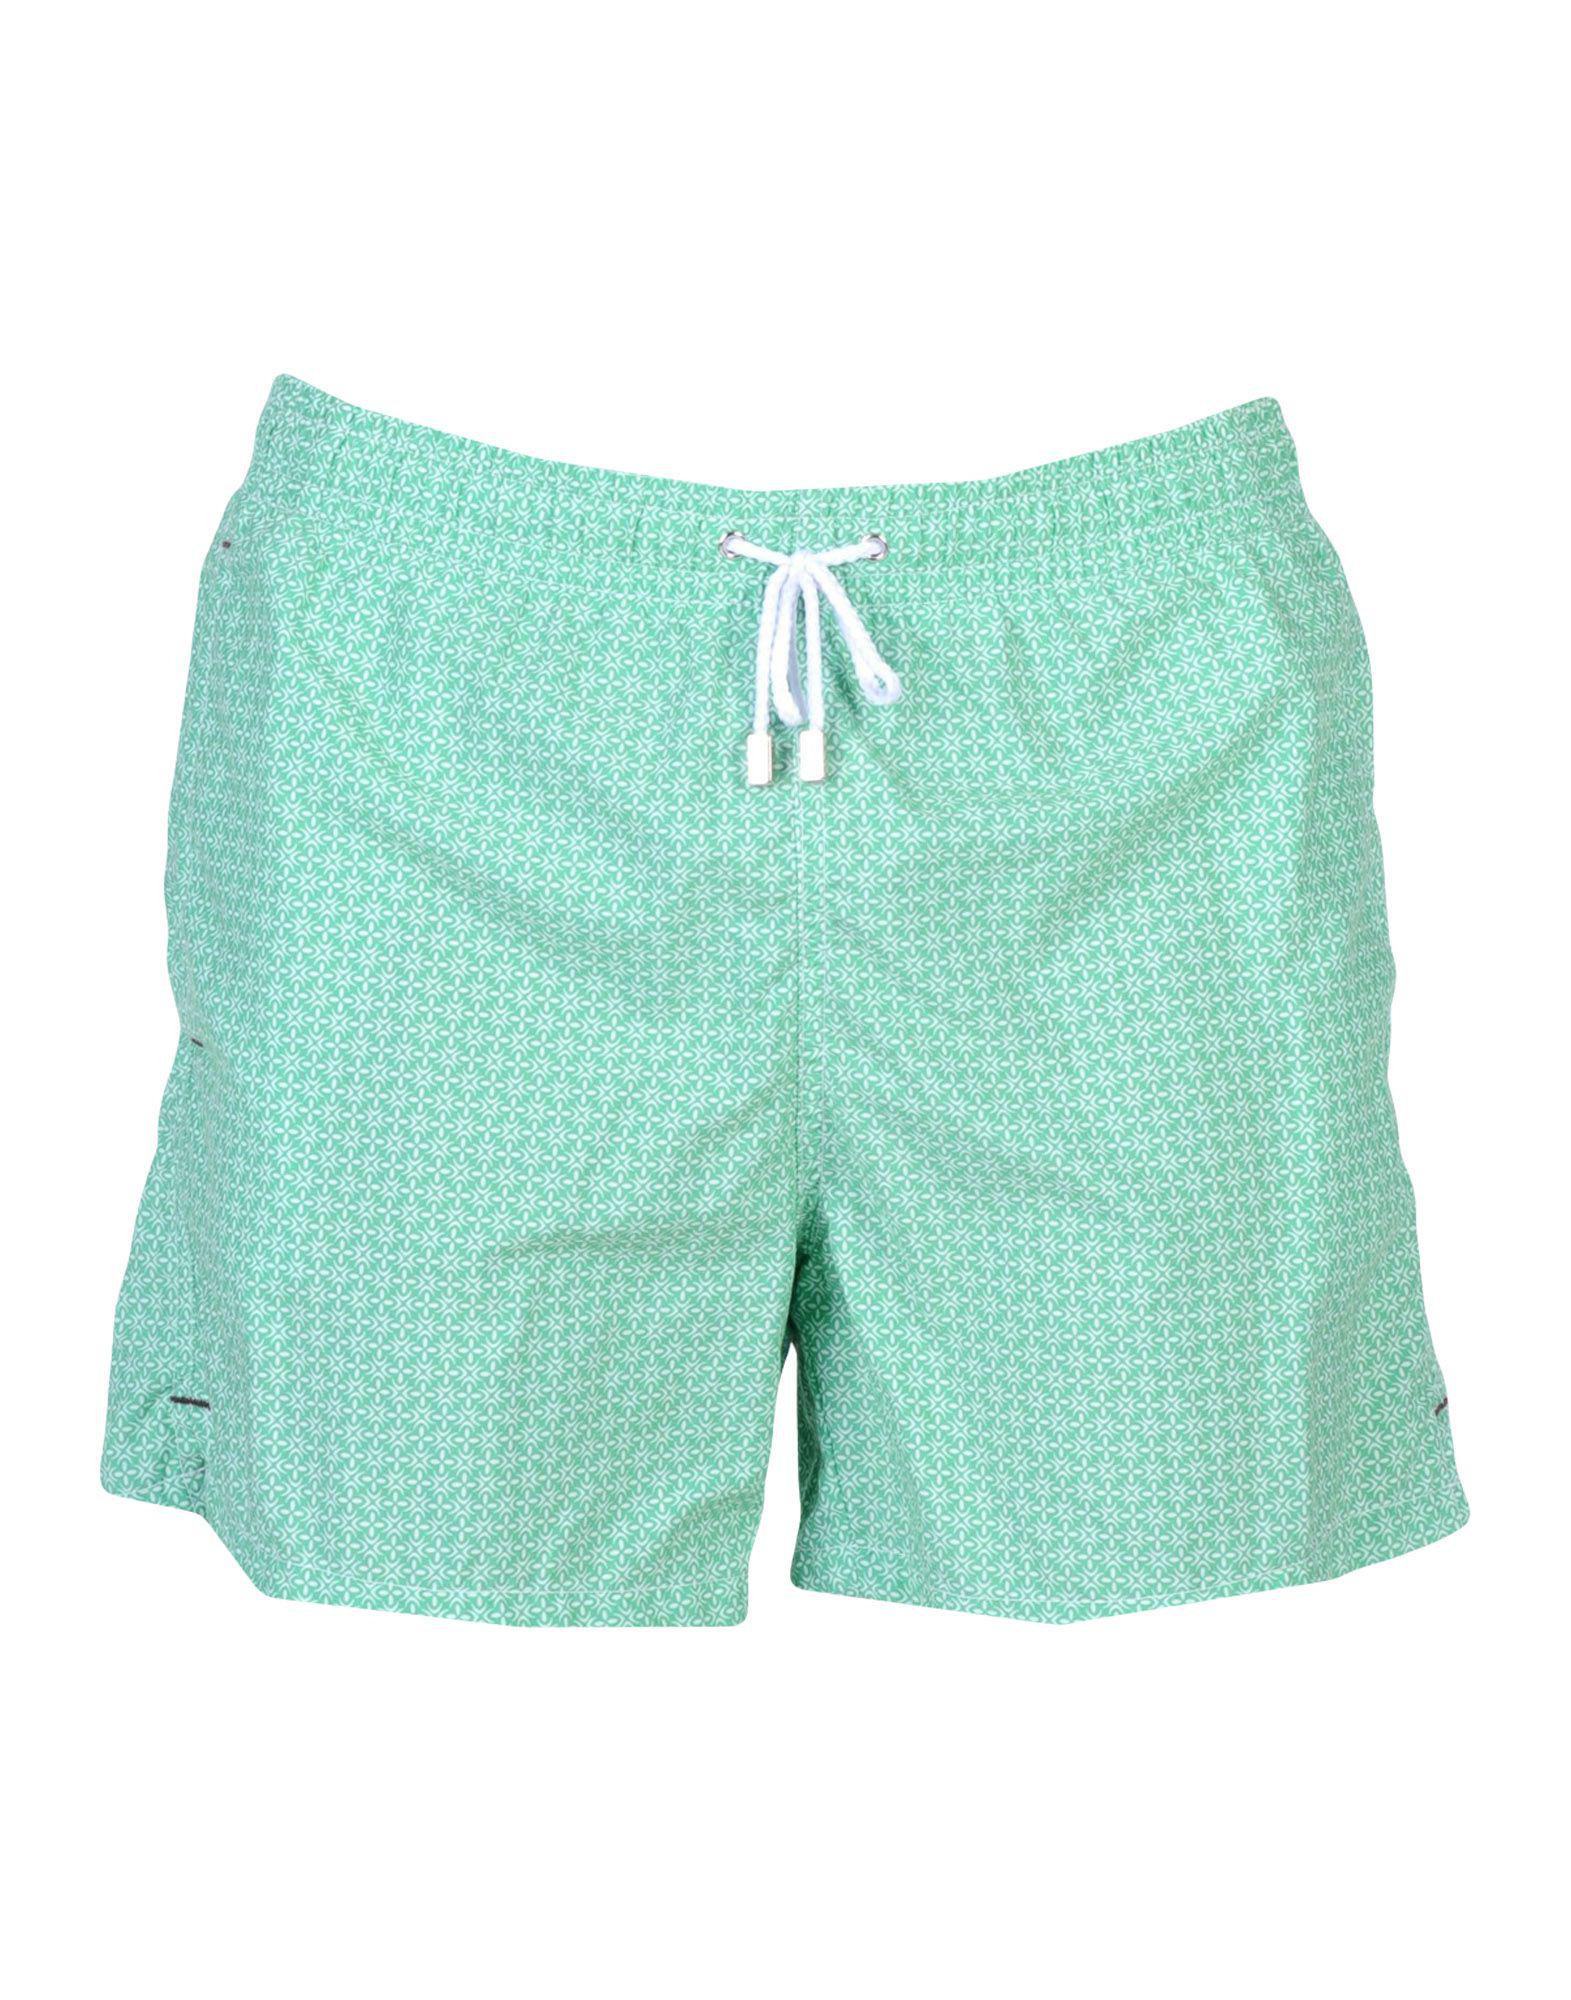 Lyst - Roda At The Beach Swimming Trunks in Green for Men